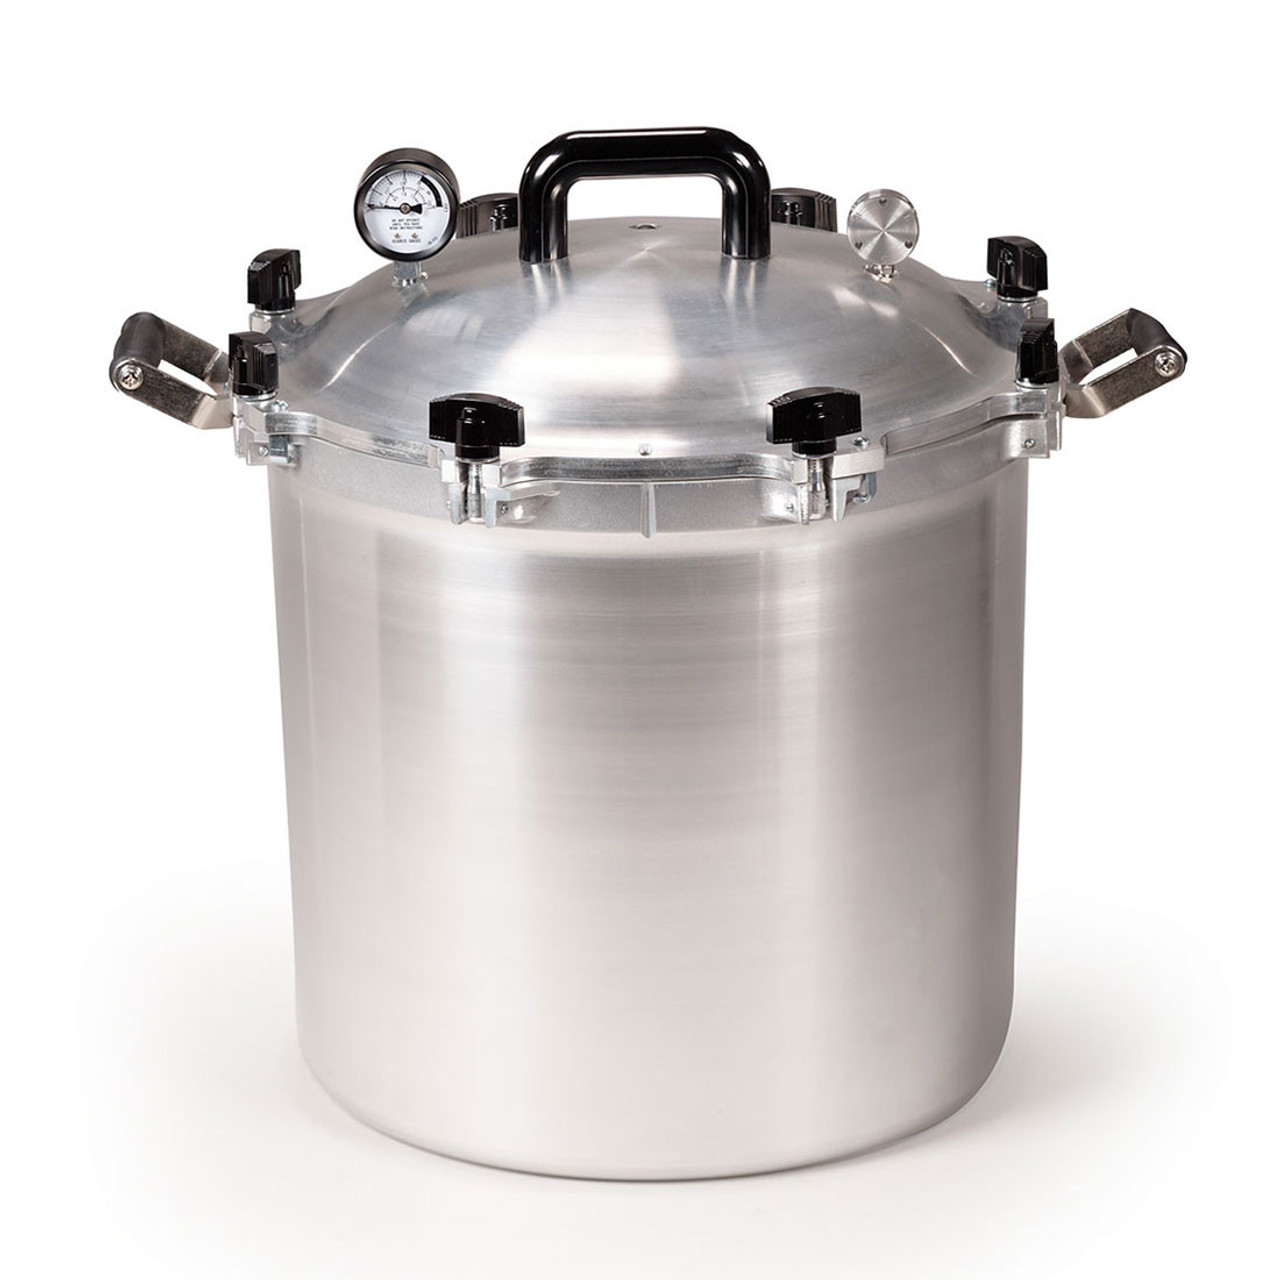 https://cdn11.bigcommerce.com/s-j602wc6a/images/stencil/1280x1280/products/7000/31531/941-All-American-Pressure-Canner-Cooker-41.5qt__94609.1699659176.jpg?c=2